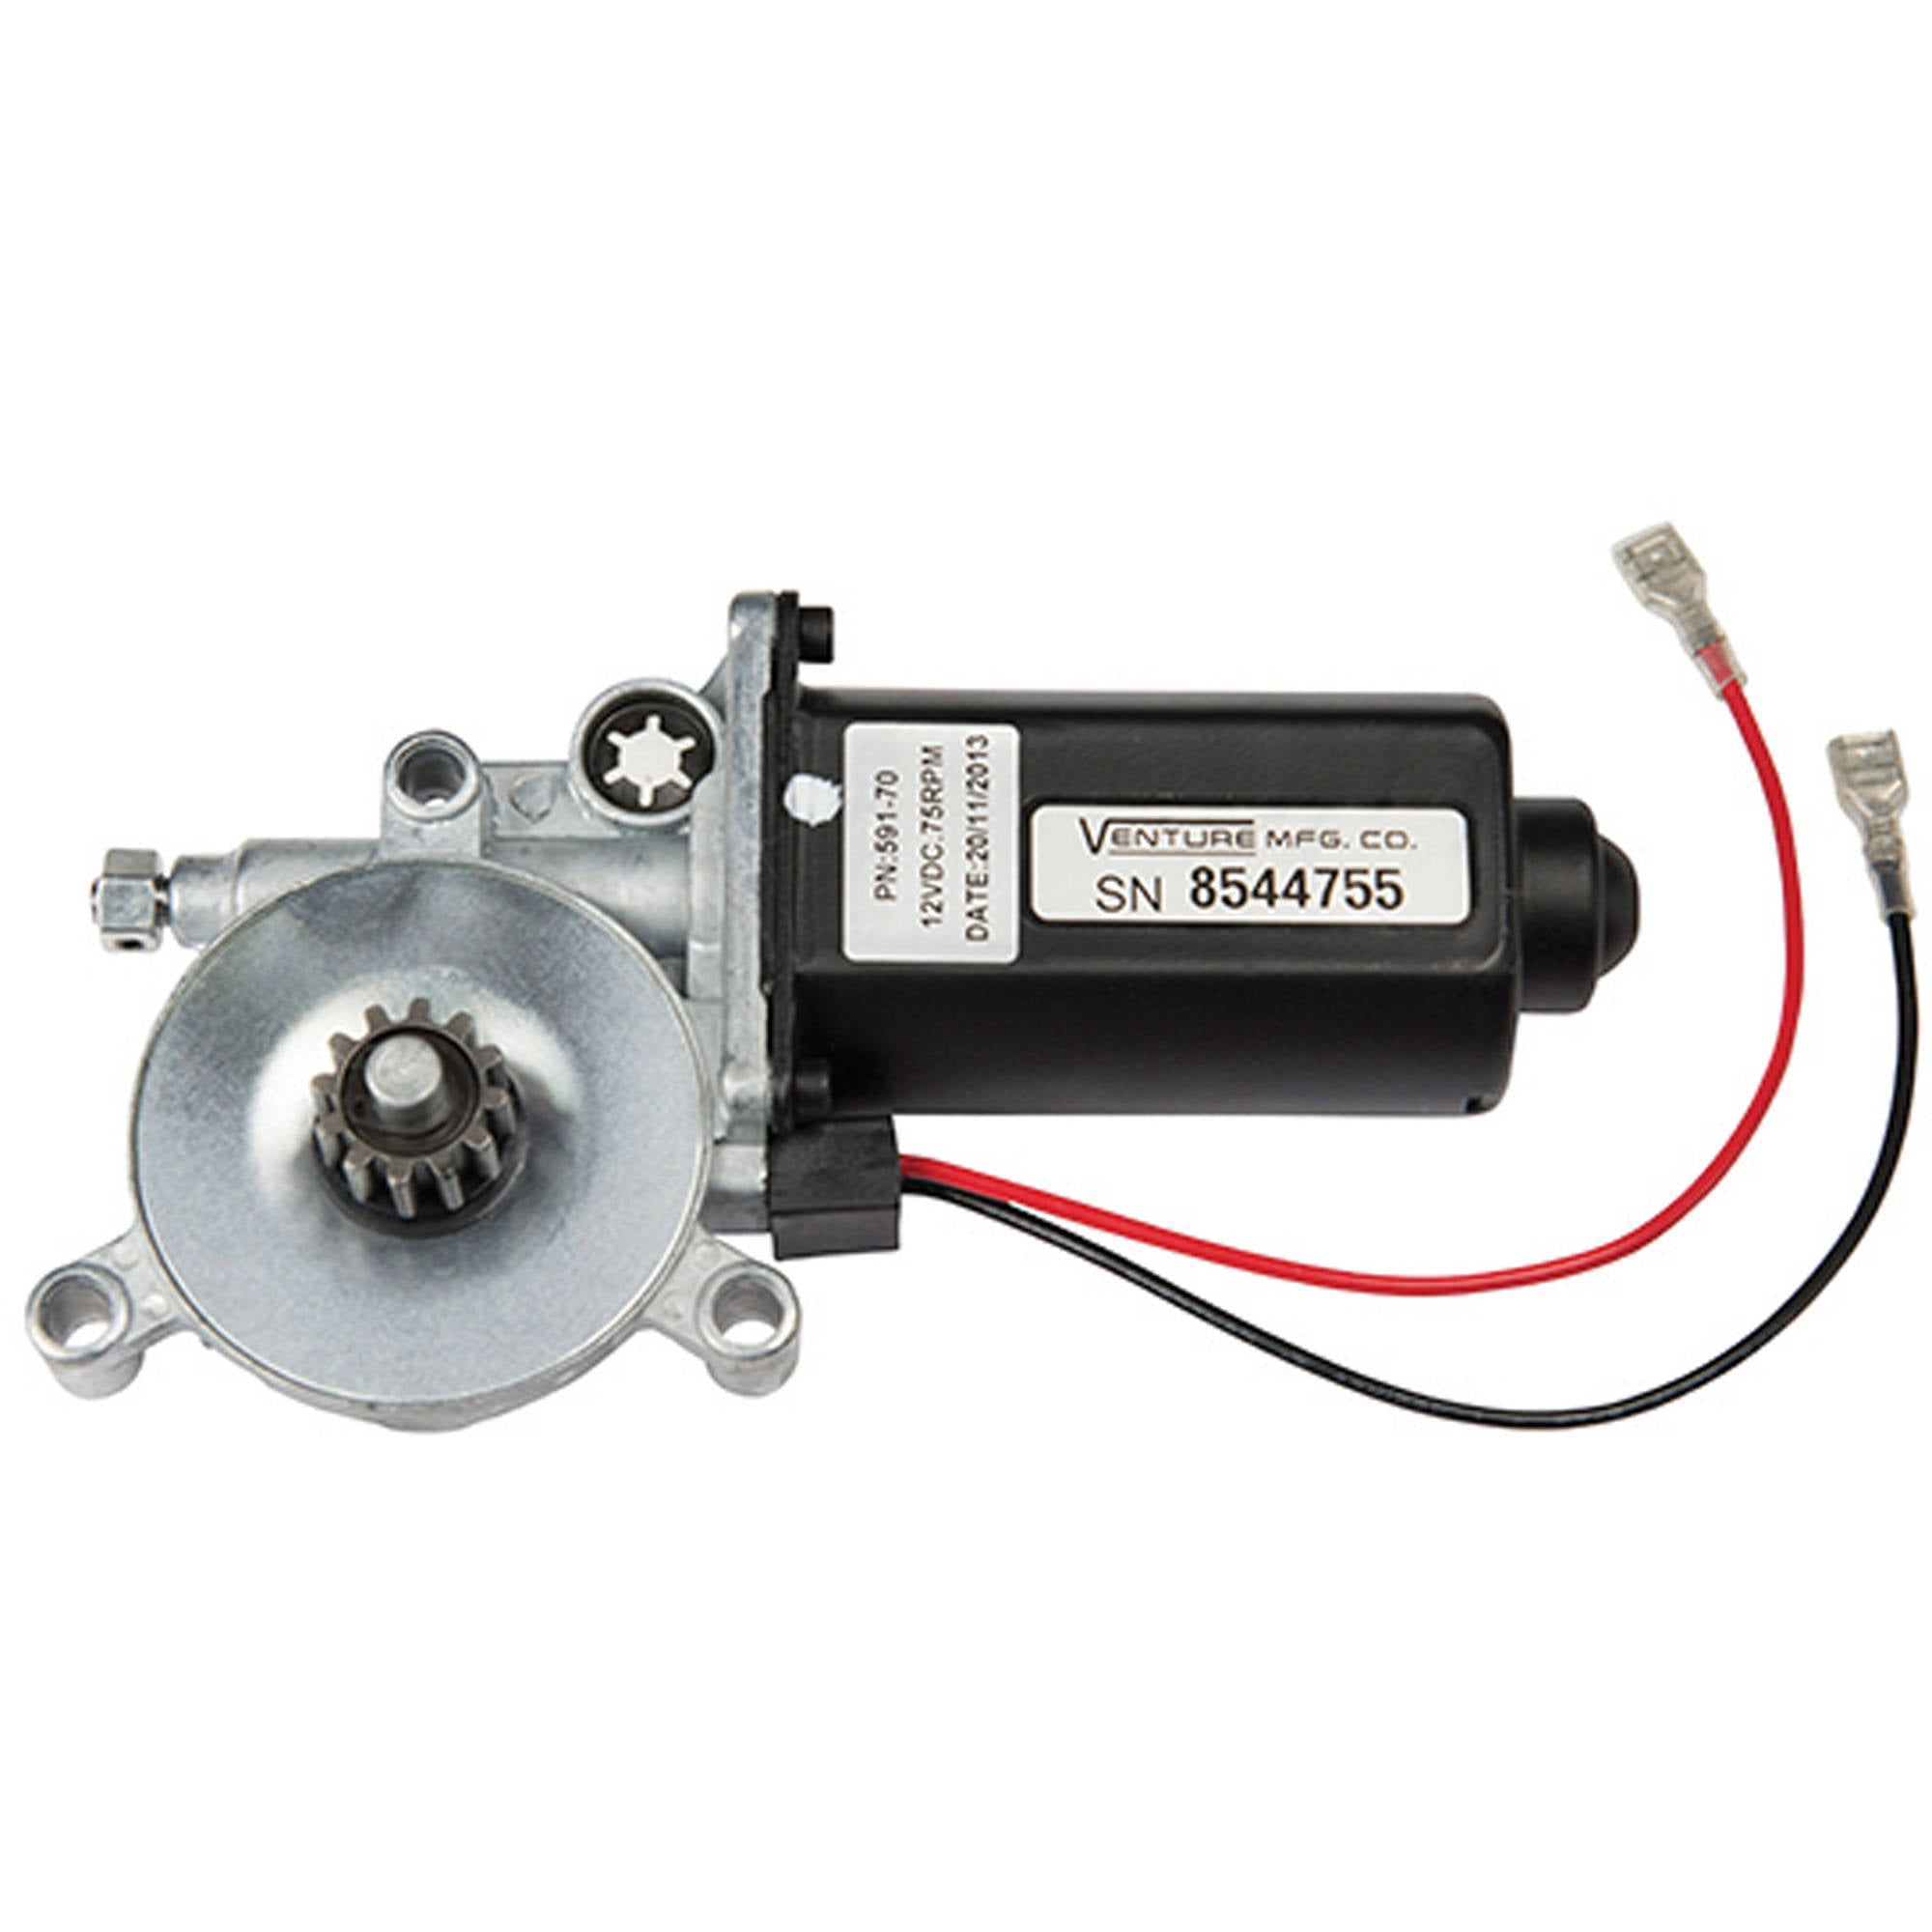 Lippert Components 266149 Solera Power Awning Replacement Motor